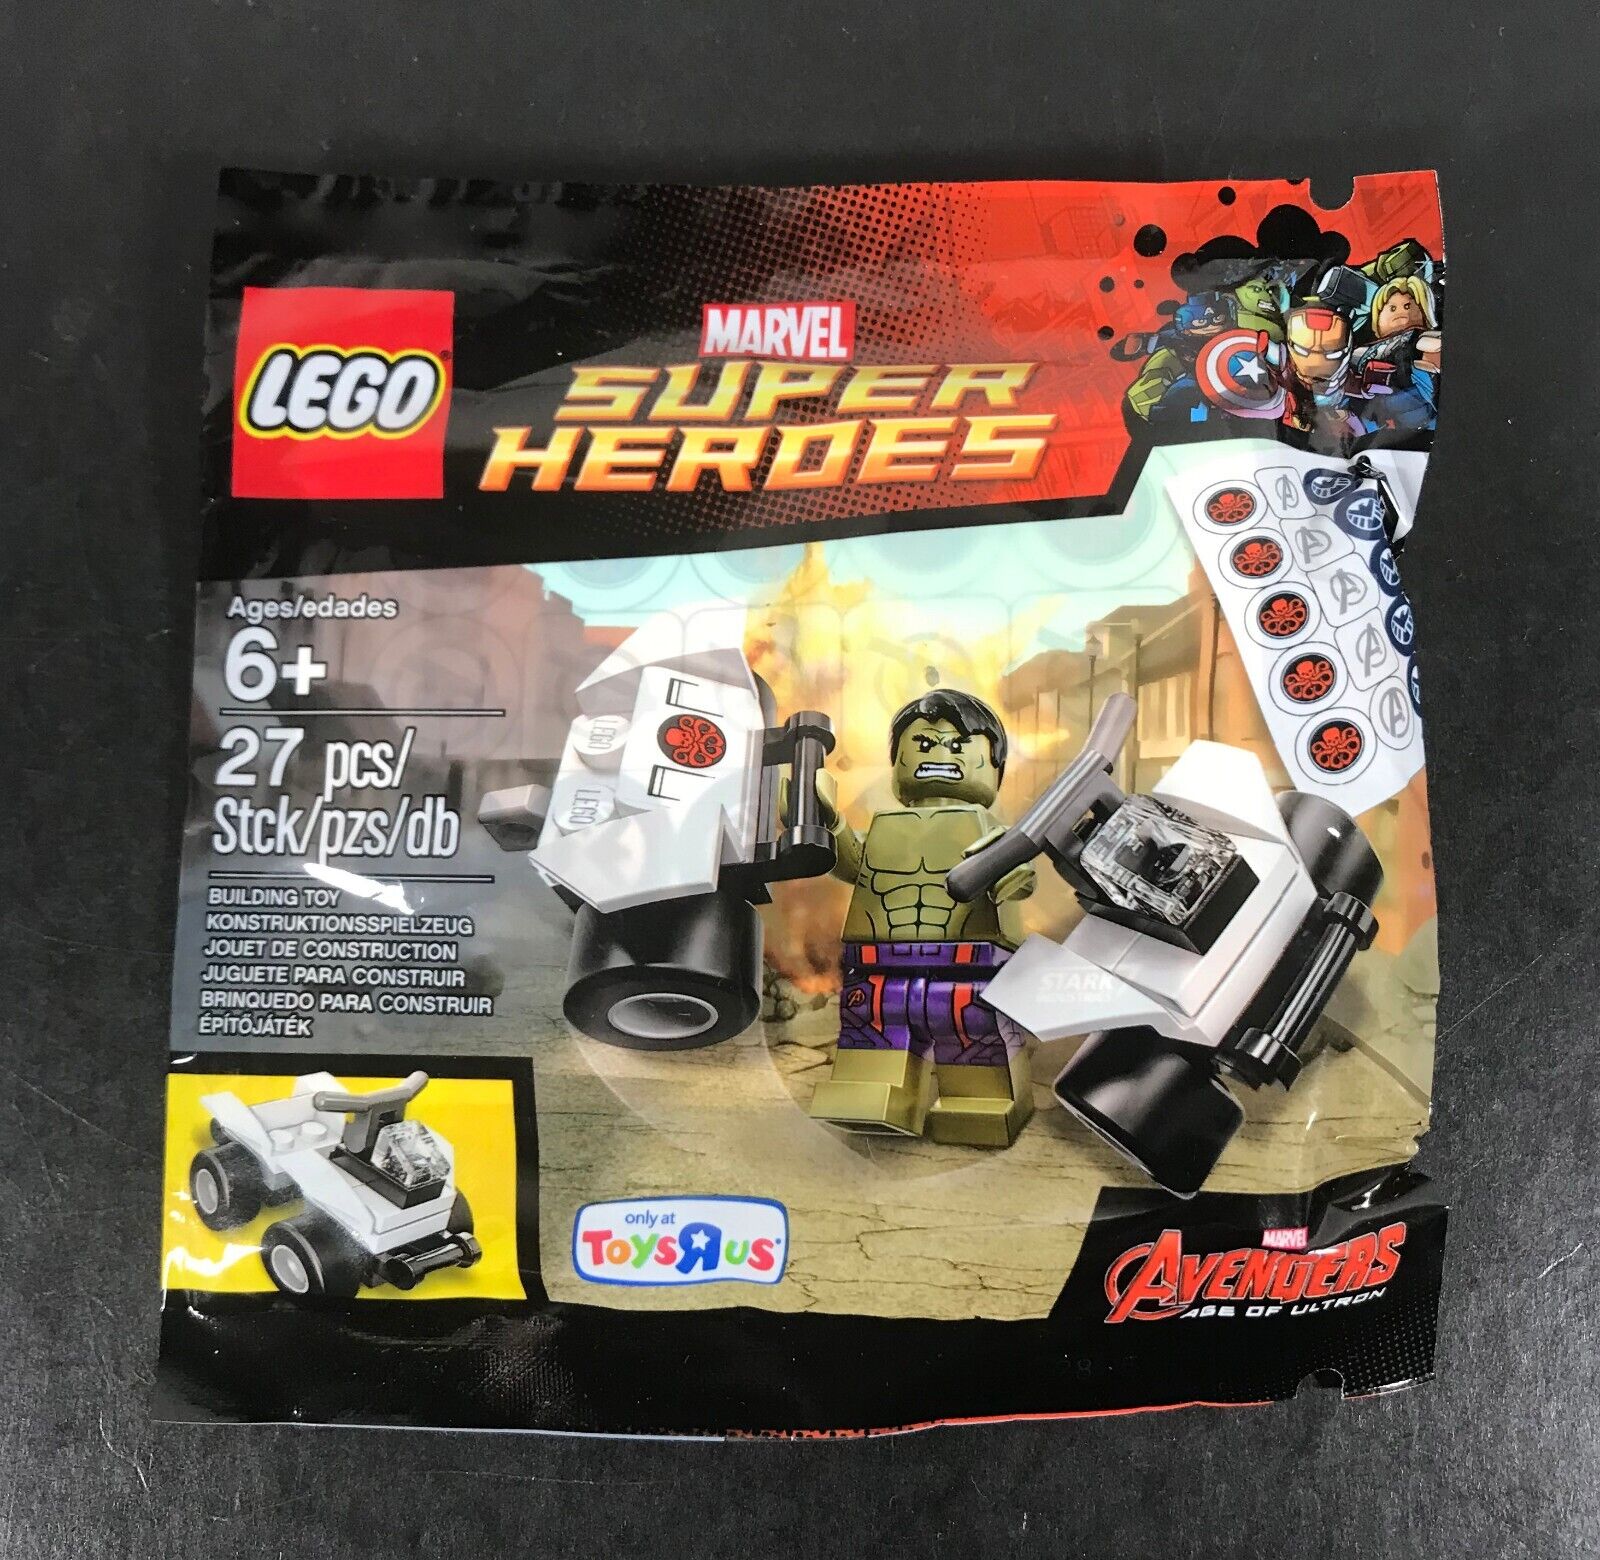 LEGO Marvel Super Heroes HULK 5003084 FACTORY SEALED Polybag *Ships in Box*